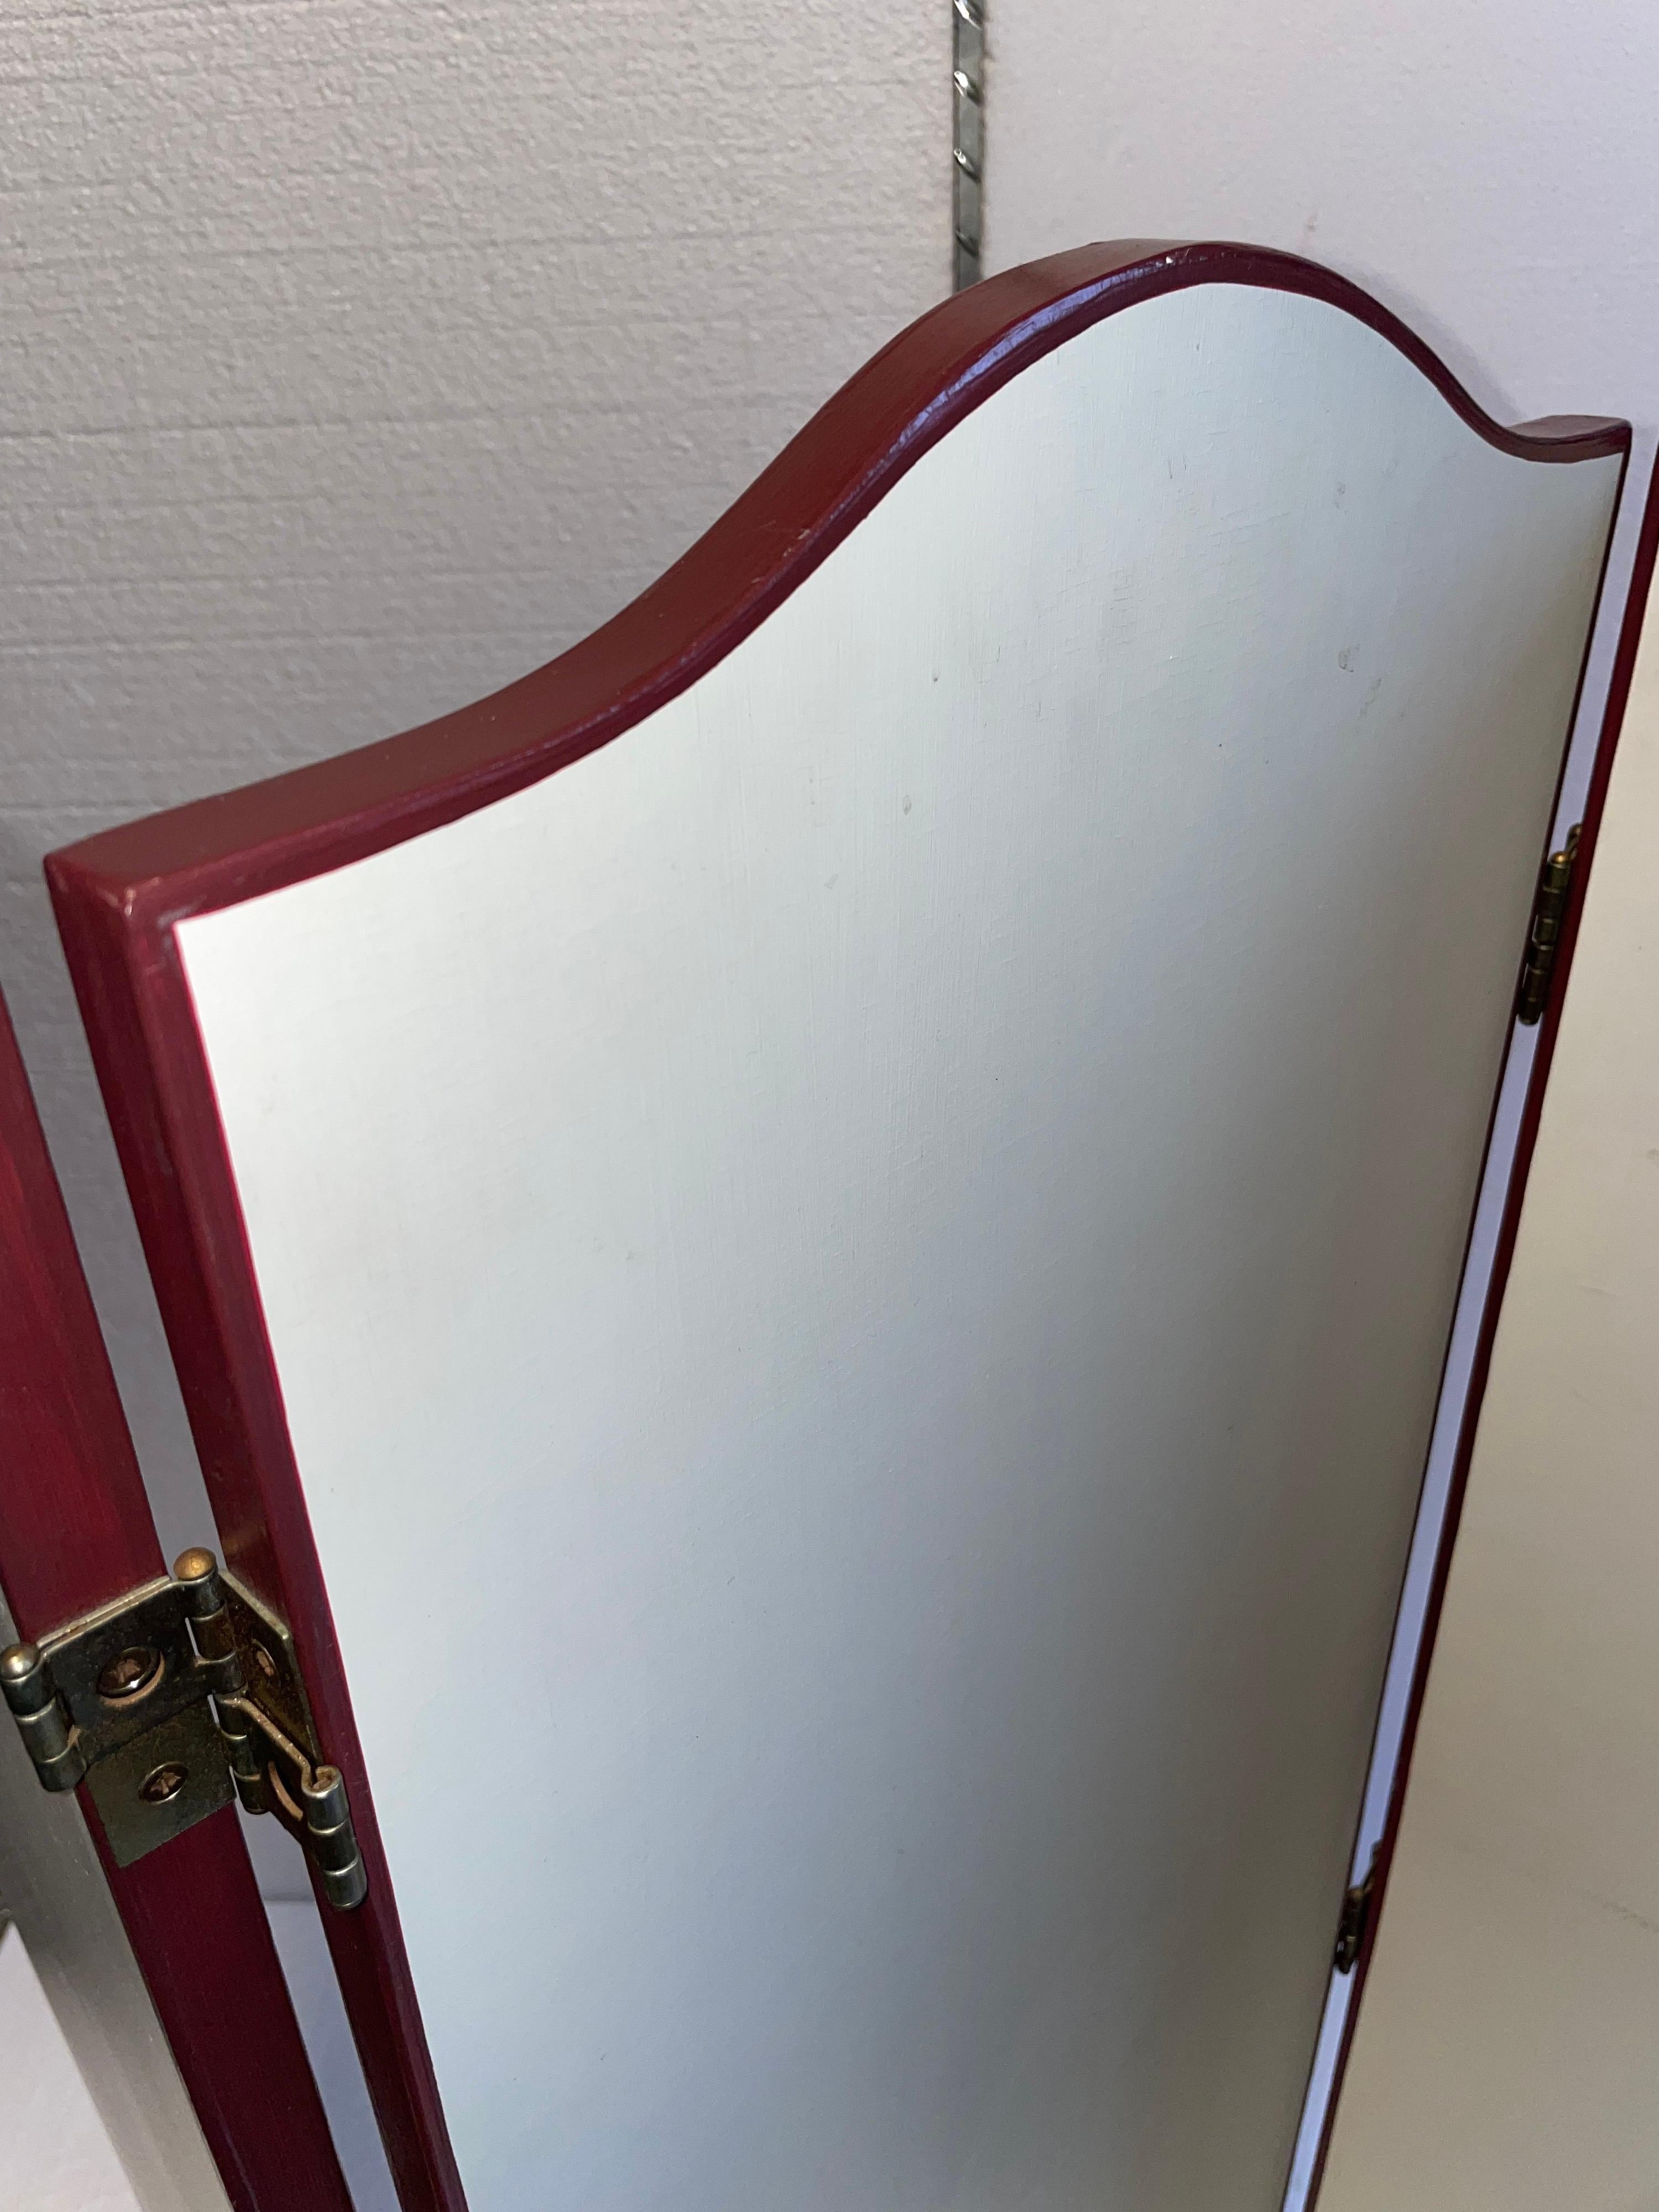 Artistic Hand Painted French Screen Divider in a Festive White and Deep Red For Sale 7